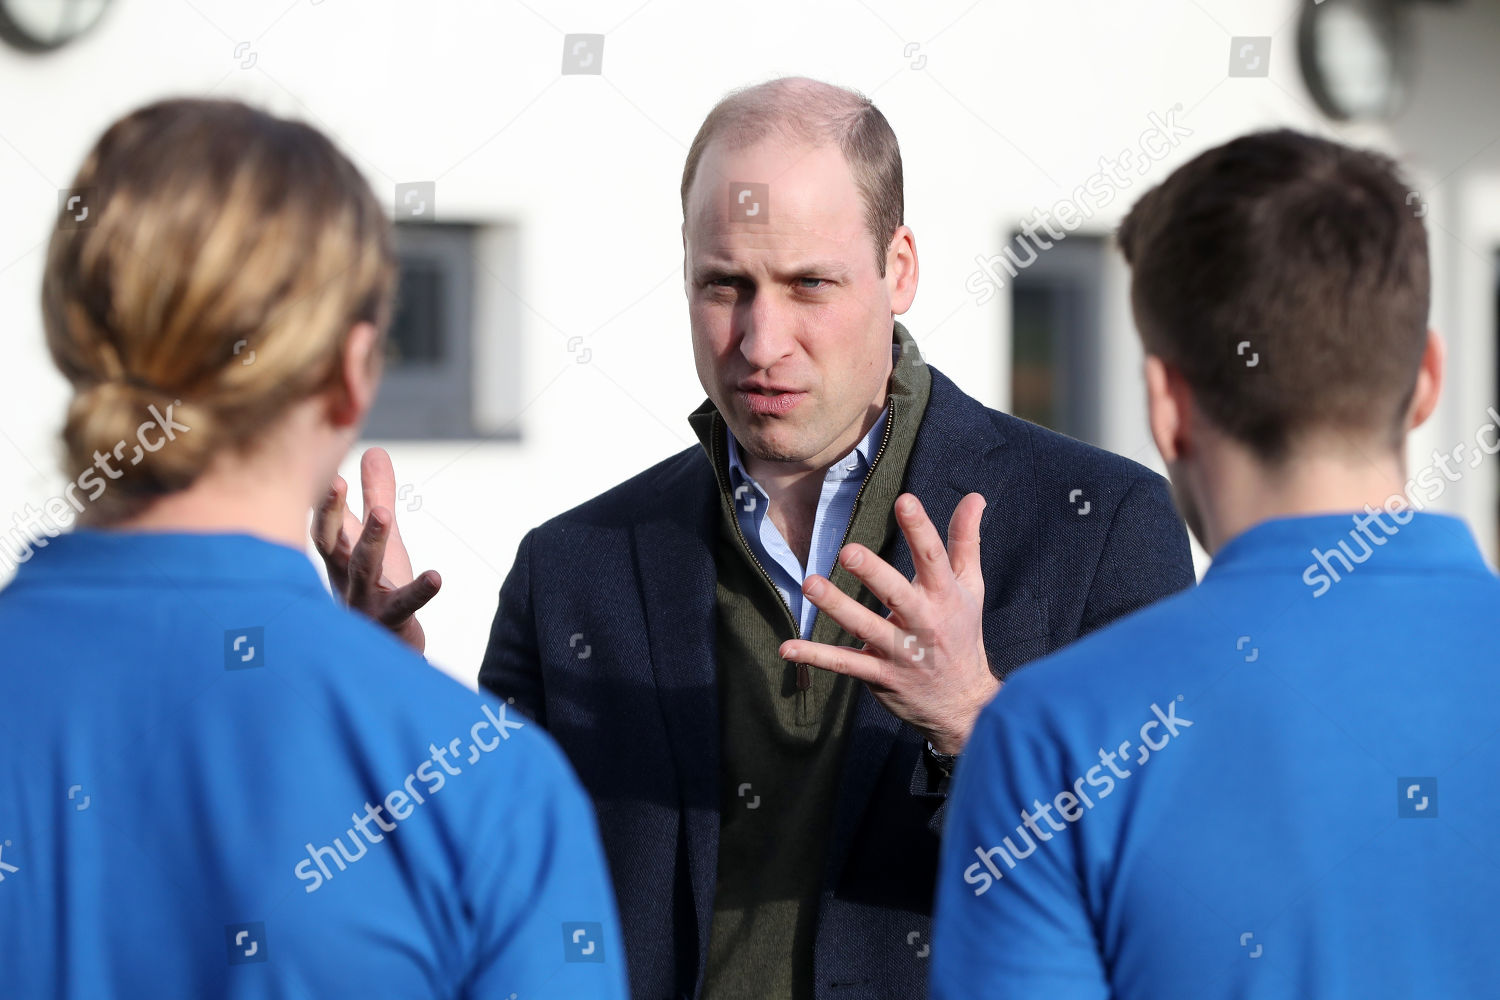 CASA REAL BRITÁNICA - Página 15 Prince-william-visit-to-liverpool-uk-shutterstock-editorial-10543630ad